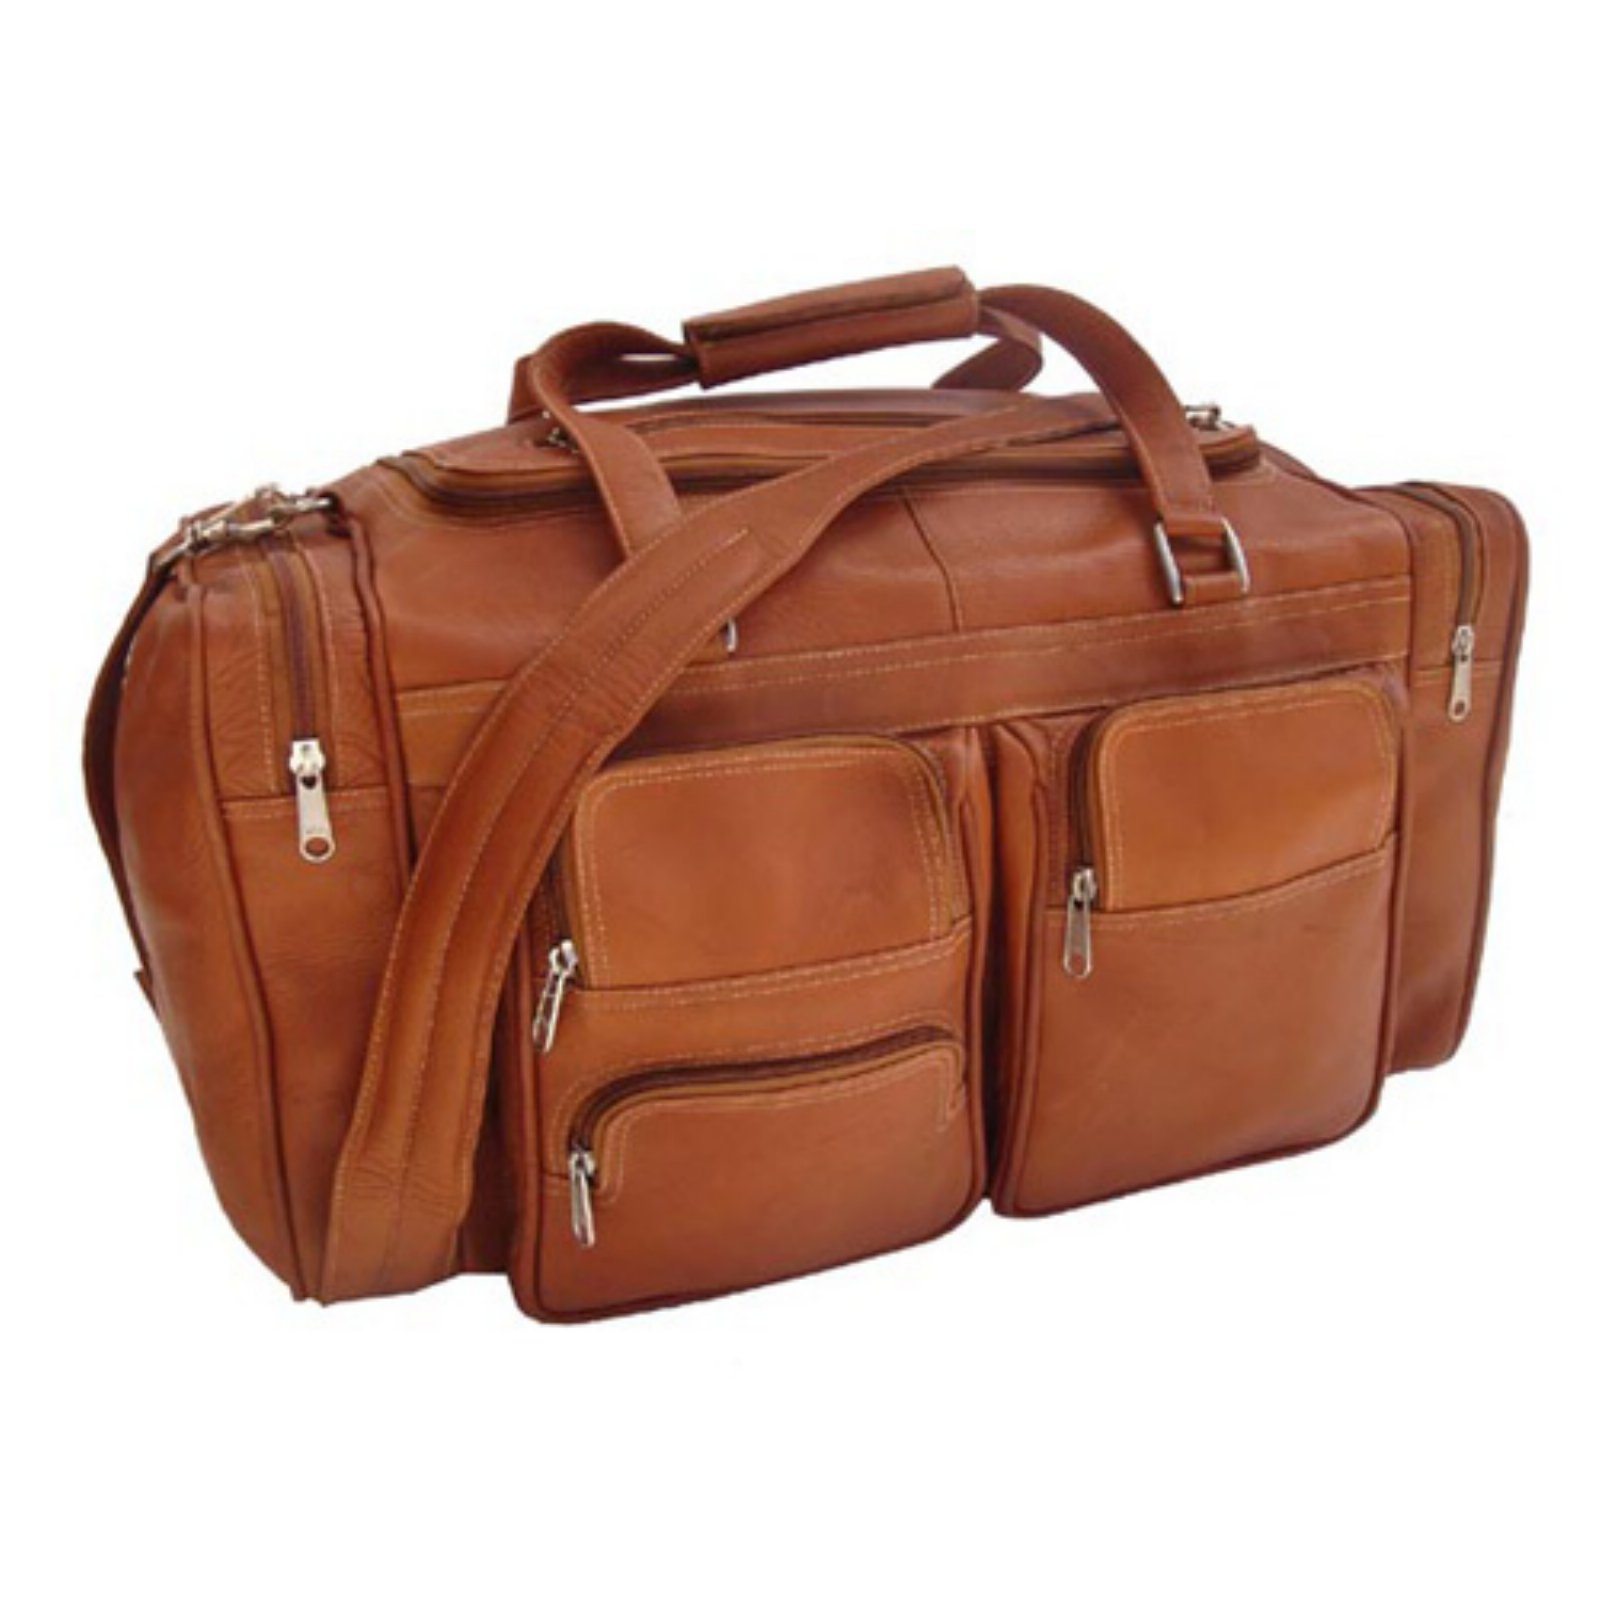 Piel Leather 20 inch Duffel Bag with Pockets - image 2 of 2